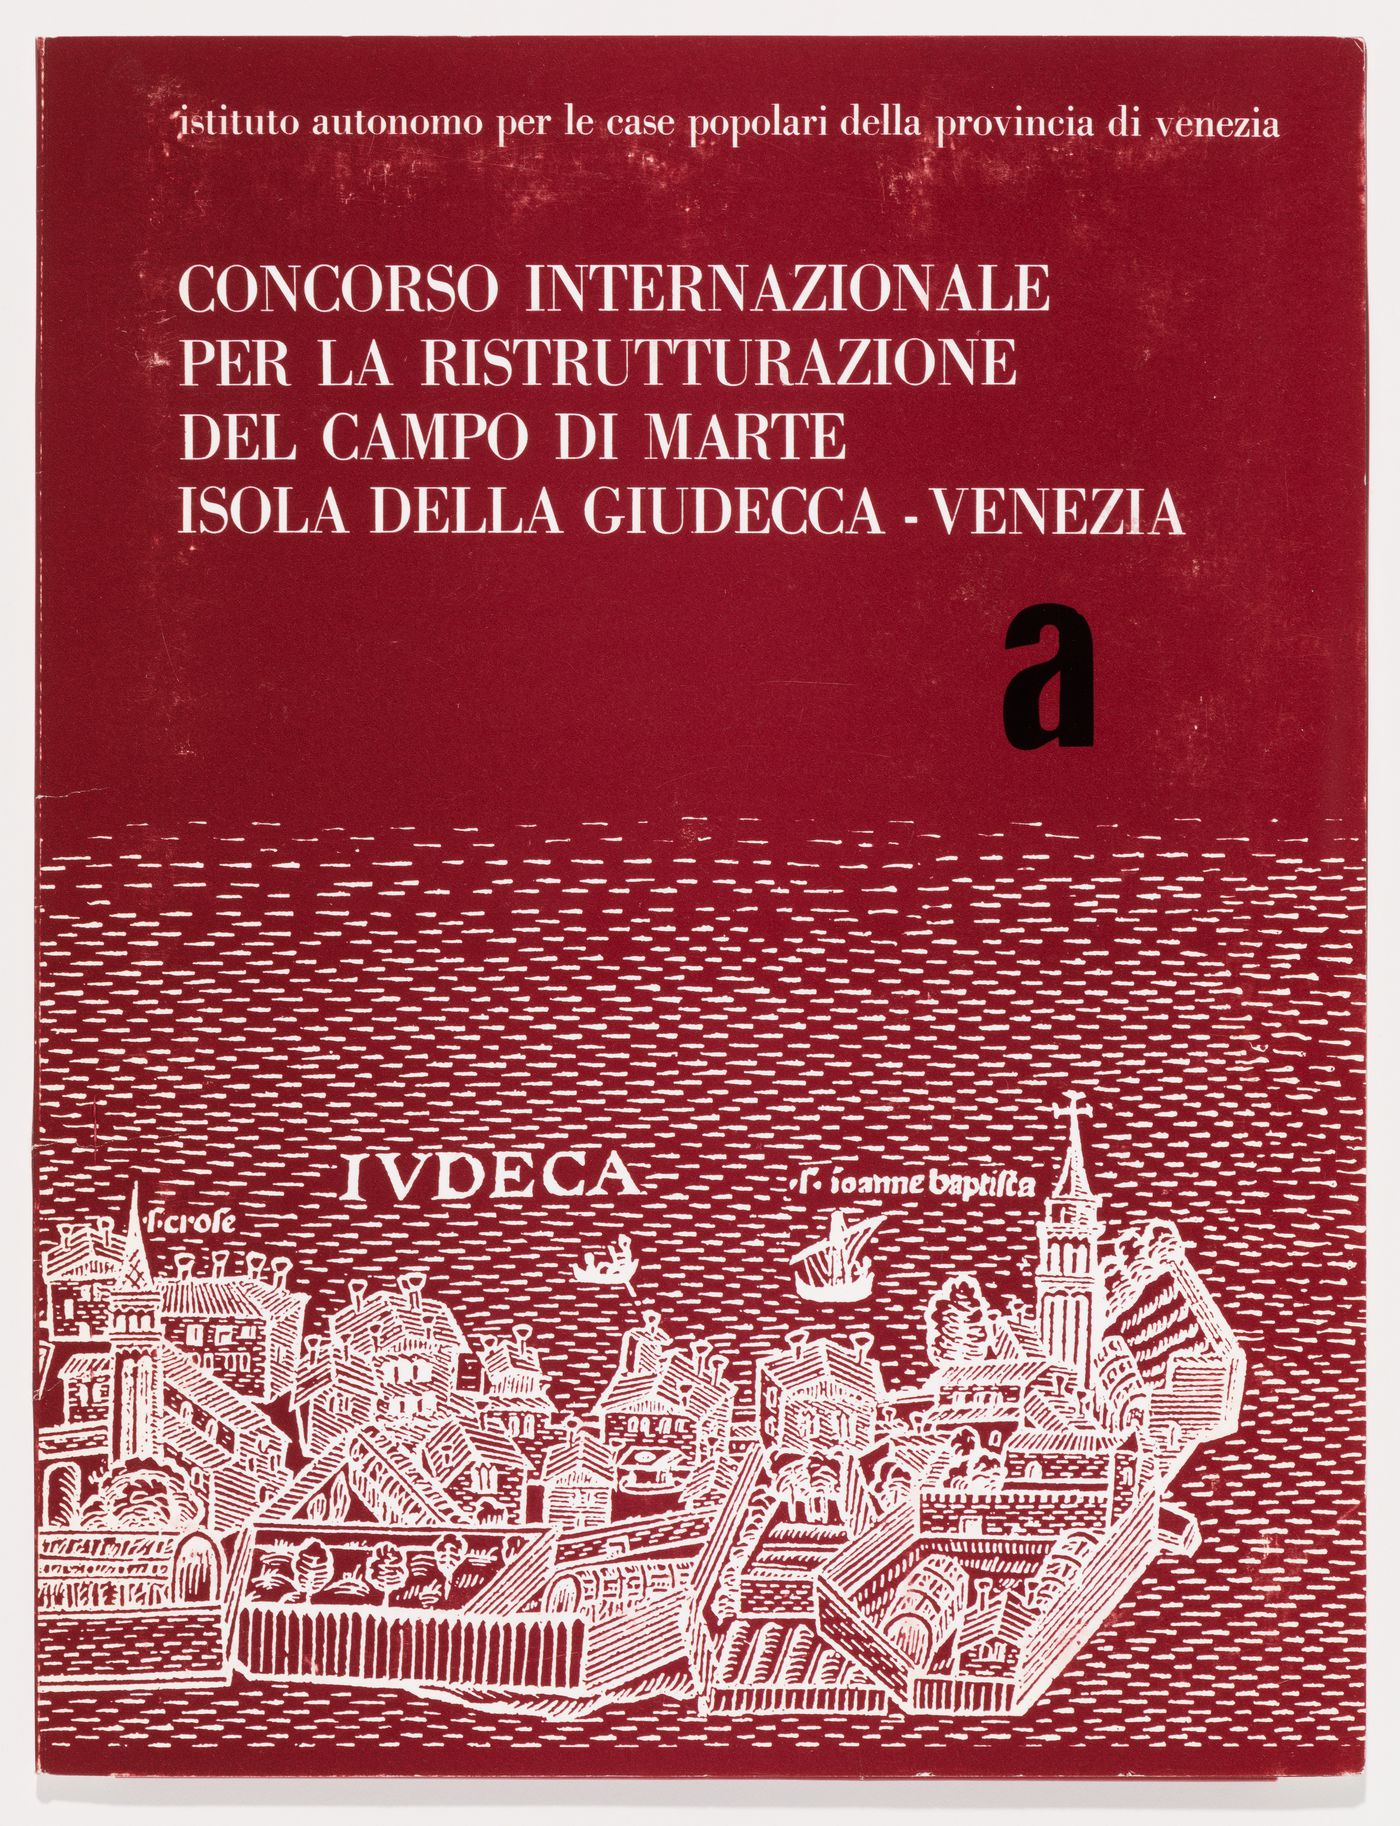 Folded map of Venice in a portfolio issued in conjunction with the competition to redevelop the Campo di Marte area of La Giudecca, Venice, Italy